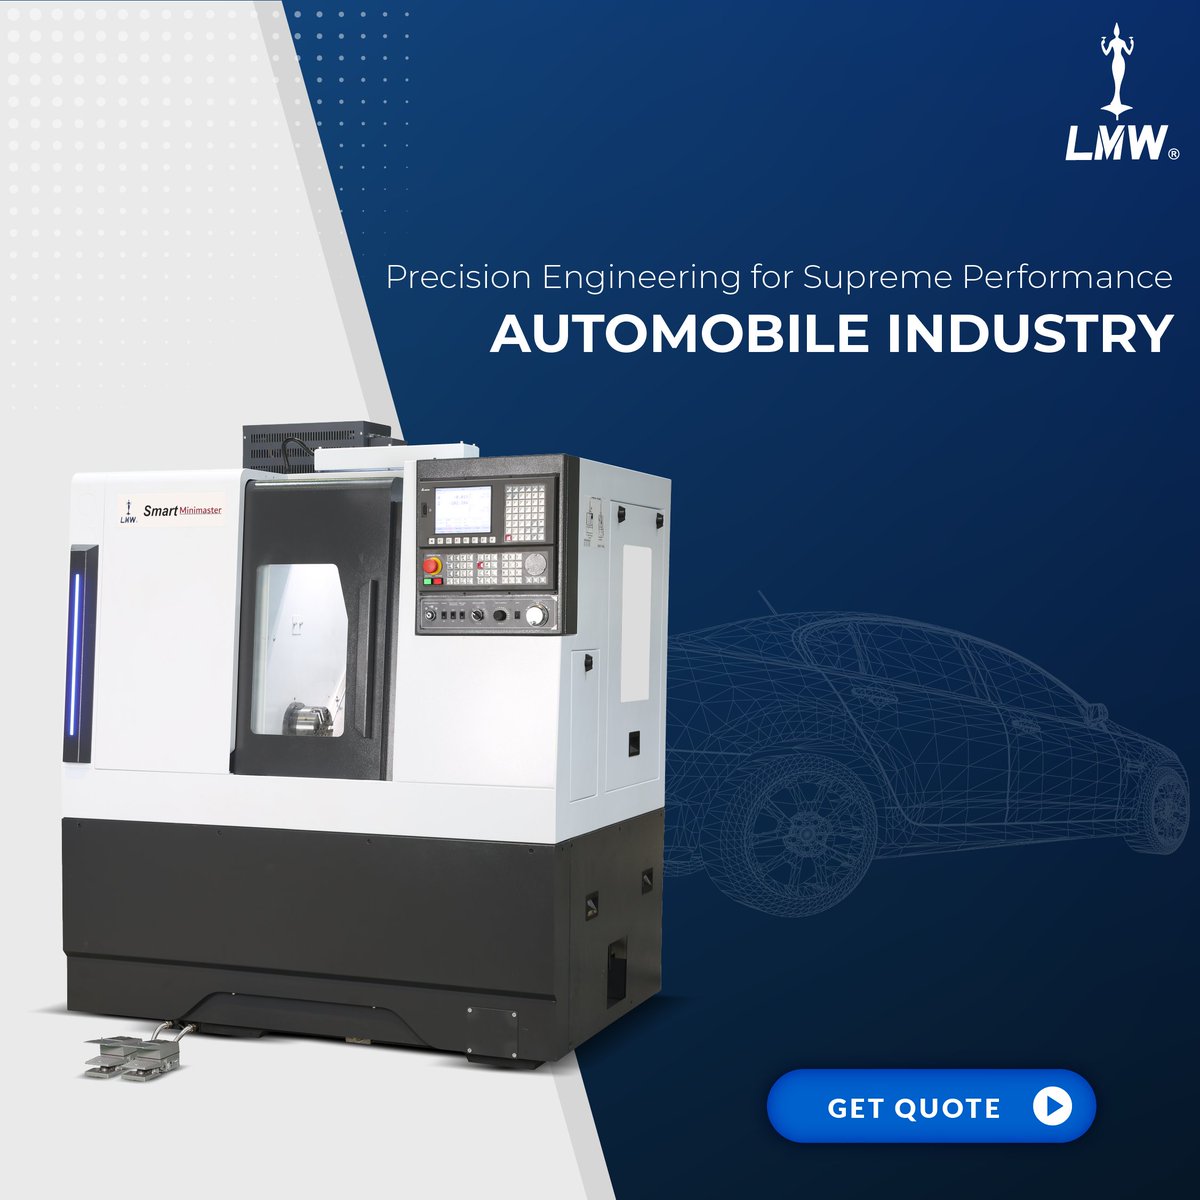 Boost your precision machining game with LMW's #SmartMinimaster!

Introducing LMW's Smart Minimaster, the perfect choice for the Automobile industry. Contact us today to learn more and take your business to the next level.  

lmwcnc.com/products/turni…

#AutomobileIndustry